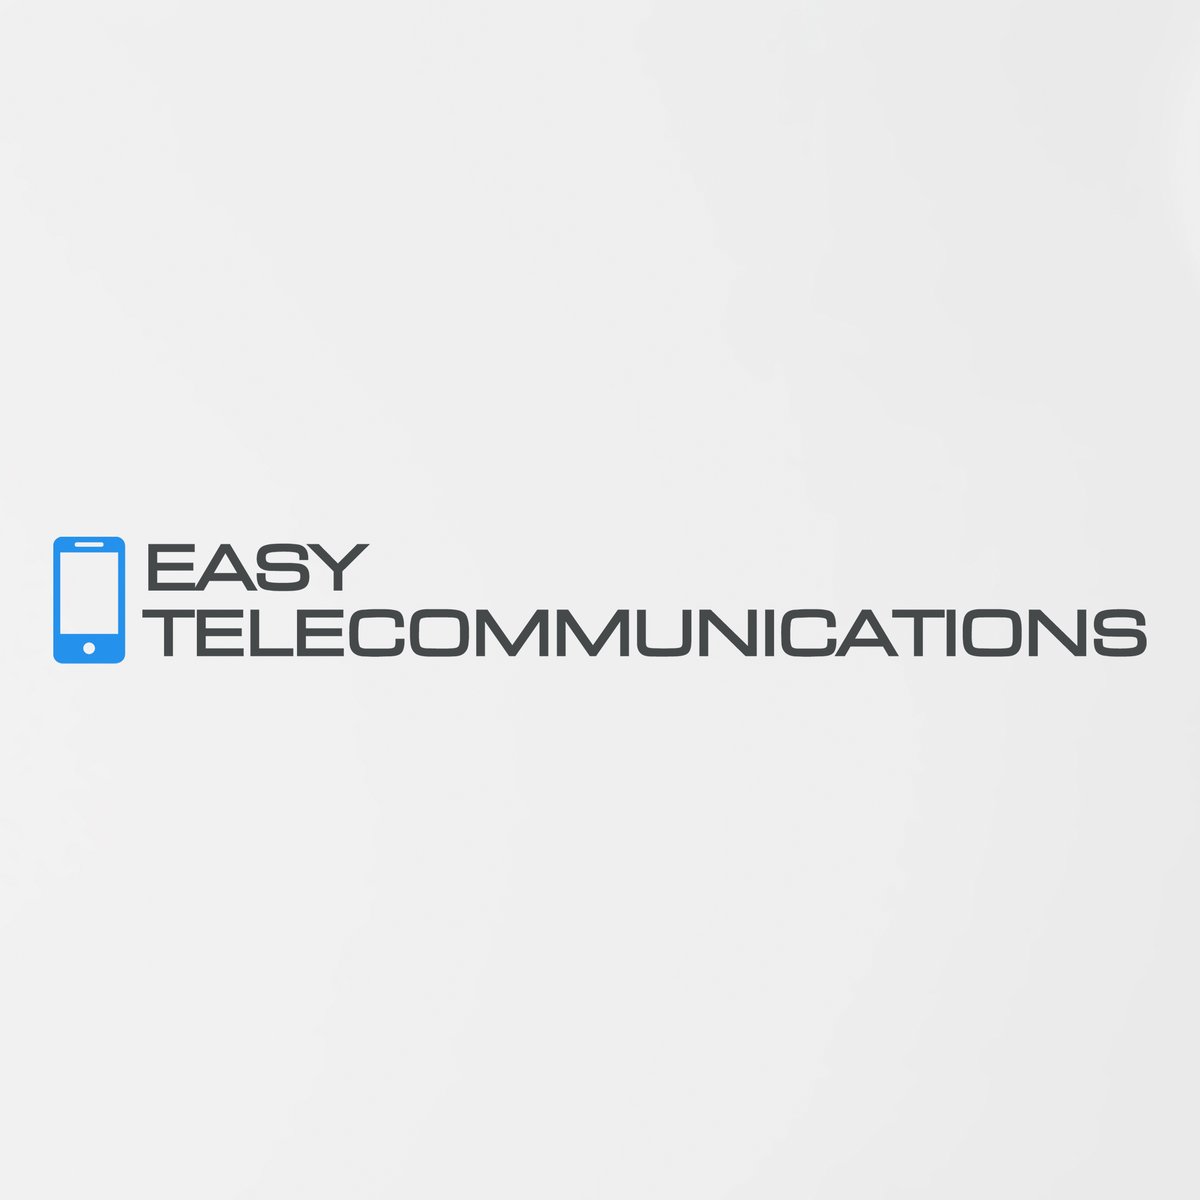 Our team can create a tailored package specifically for your company's needs:

📞 0191 367 0457
✉️ sales@easytelecommunications.co.uk

#BusinessBroadband #LeasedLines #Telecommunication #Telecom